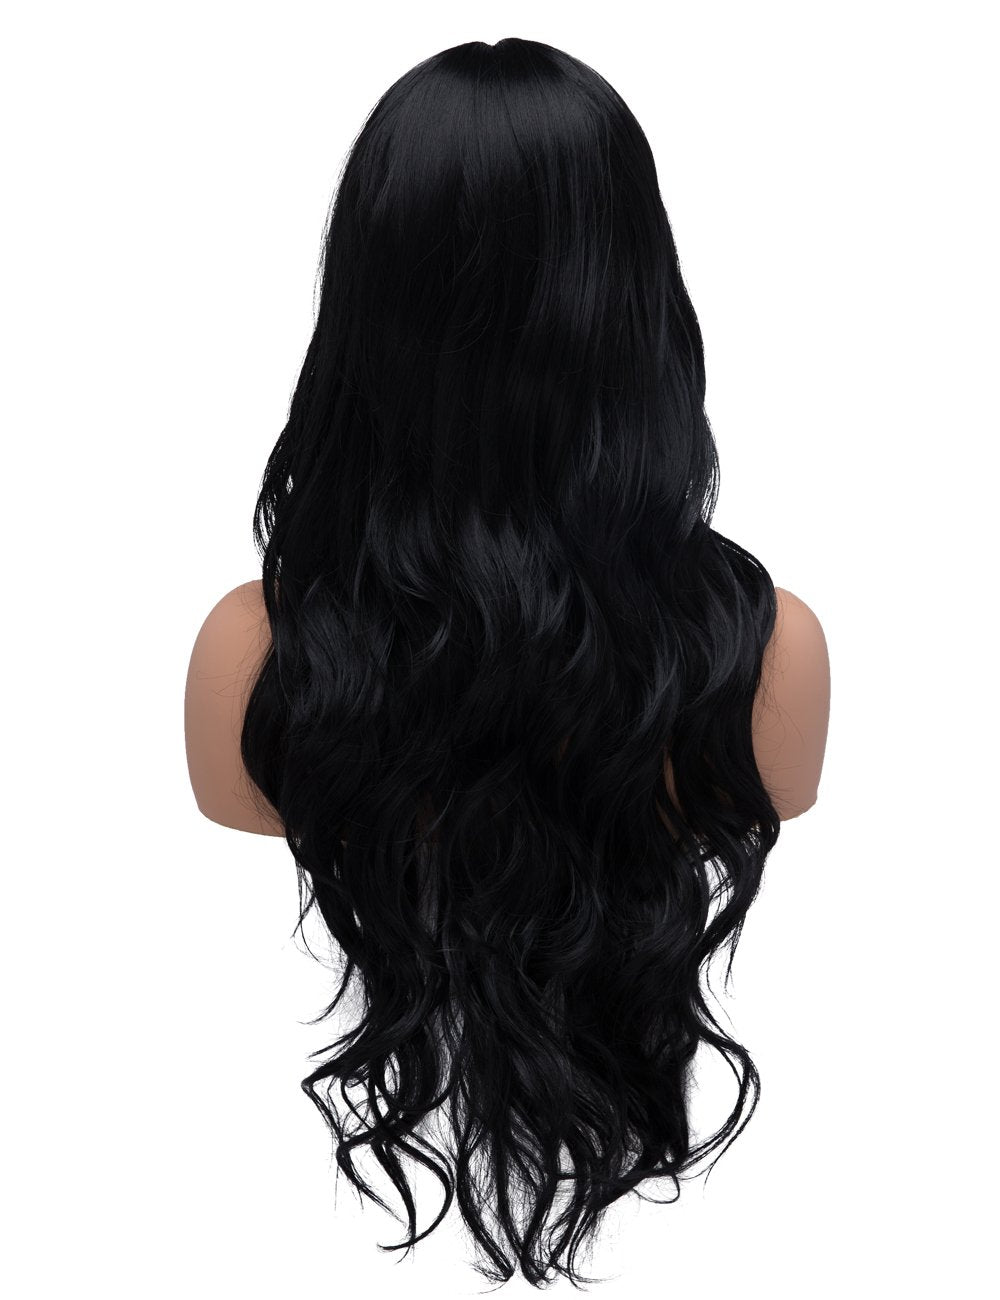 Lush Locks 24 inches Curly Wavy Wig for Women (Natural Black Color)